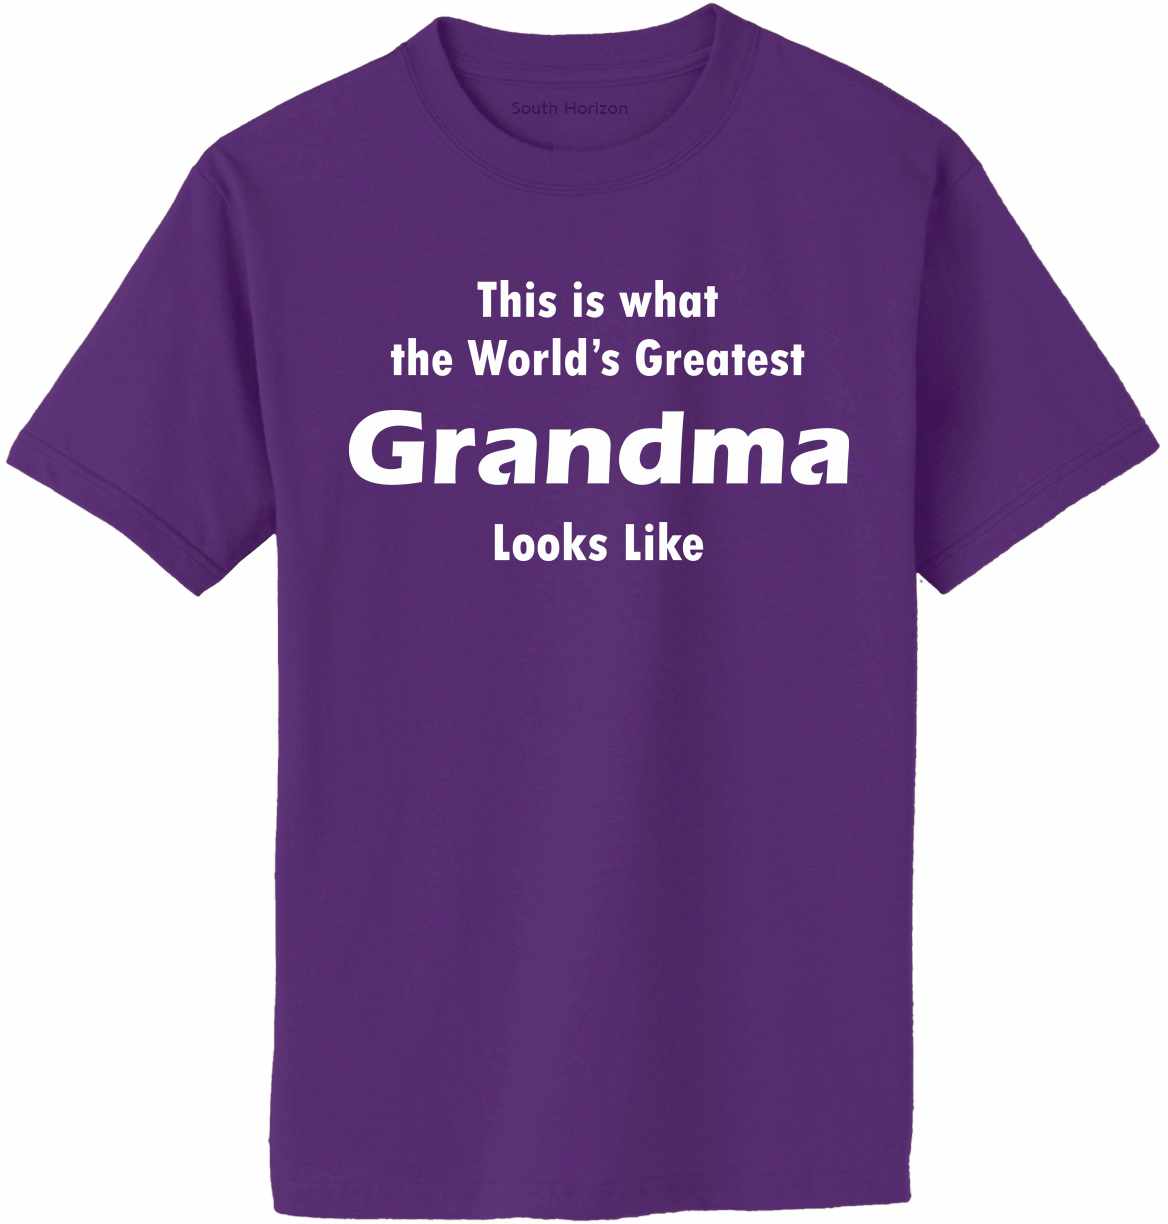 This is what the World's Greatest Grandma Looks Like Adult T-Shirt